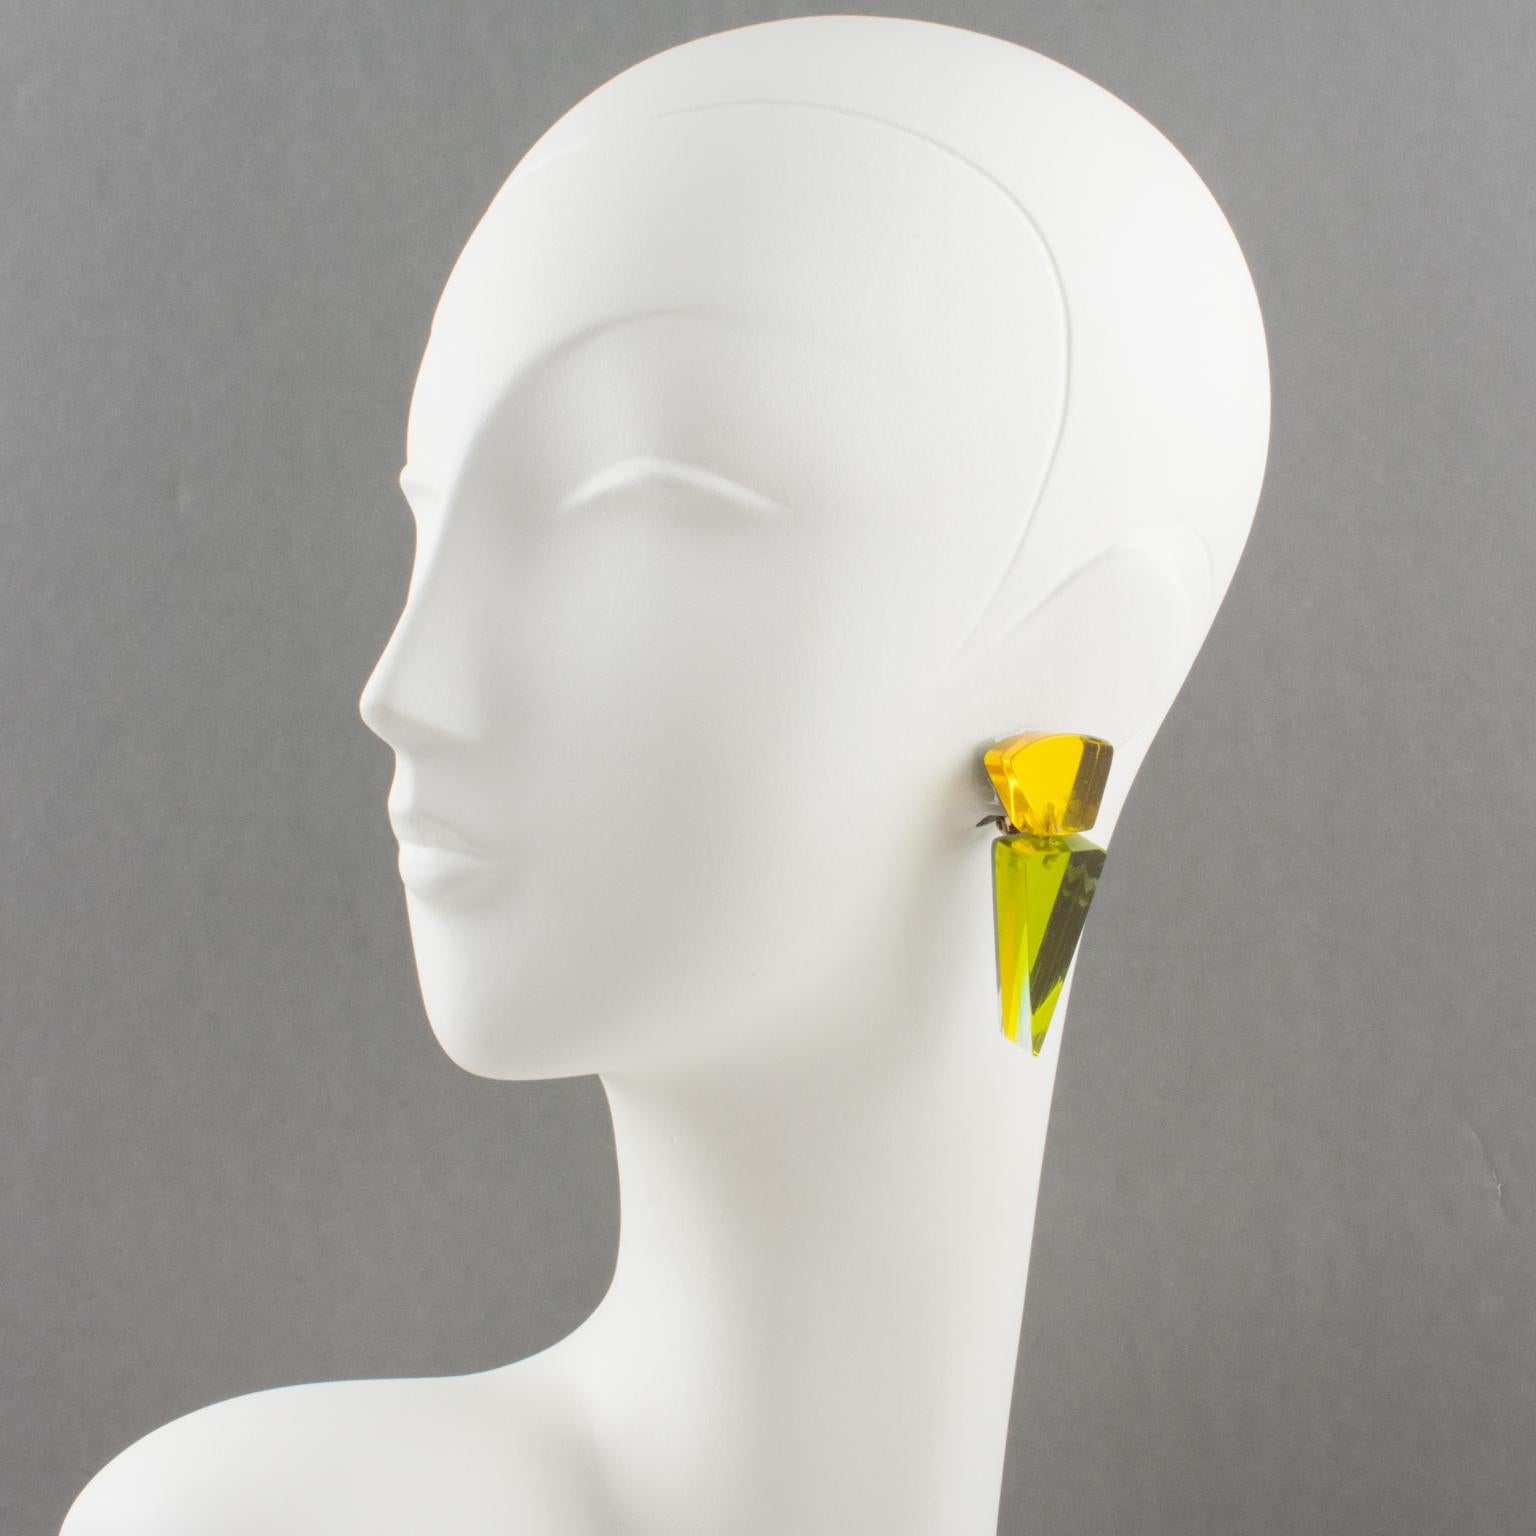 Charming Lucite clip-on earrings designed by Harriet Bauknight for Kaso. Dangling shape with geometric design. A mirrored textured pattern in olive green and bright yellow colors. Kaso paper sticker missing but the gray background and the specific